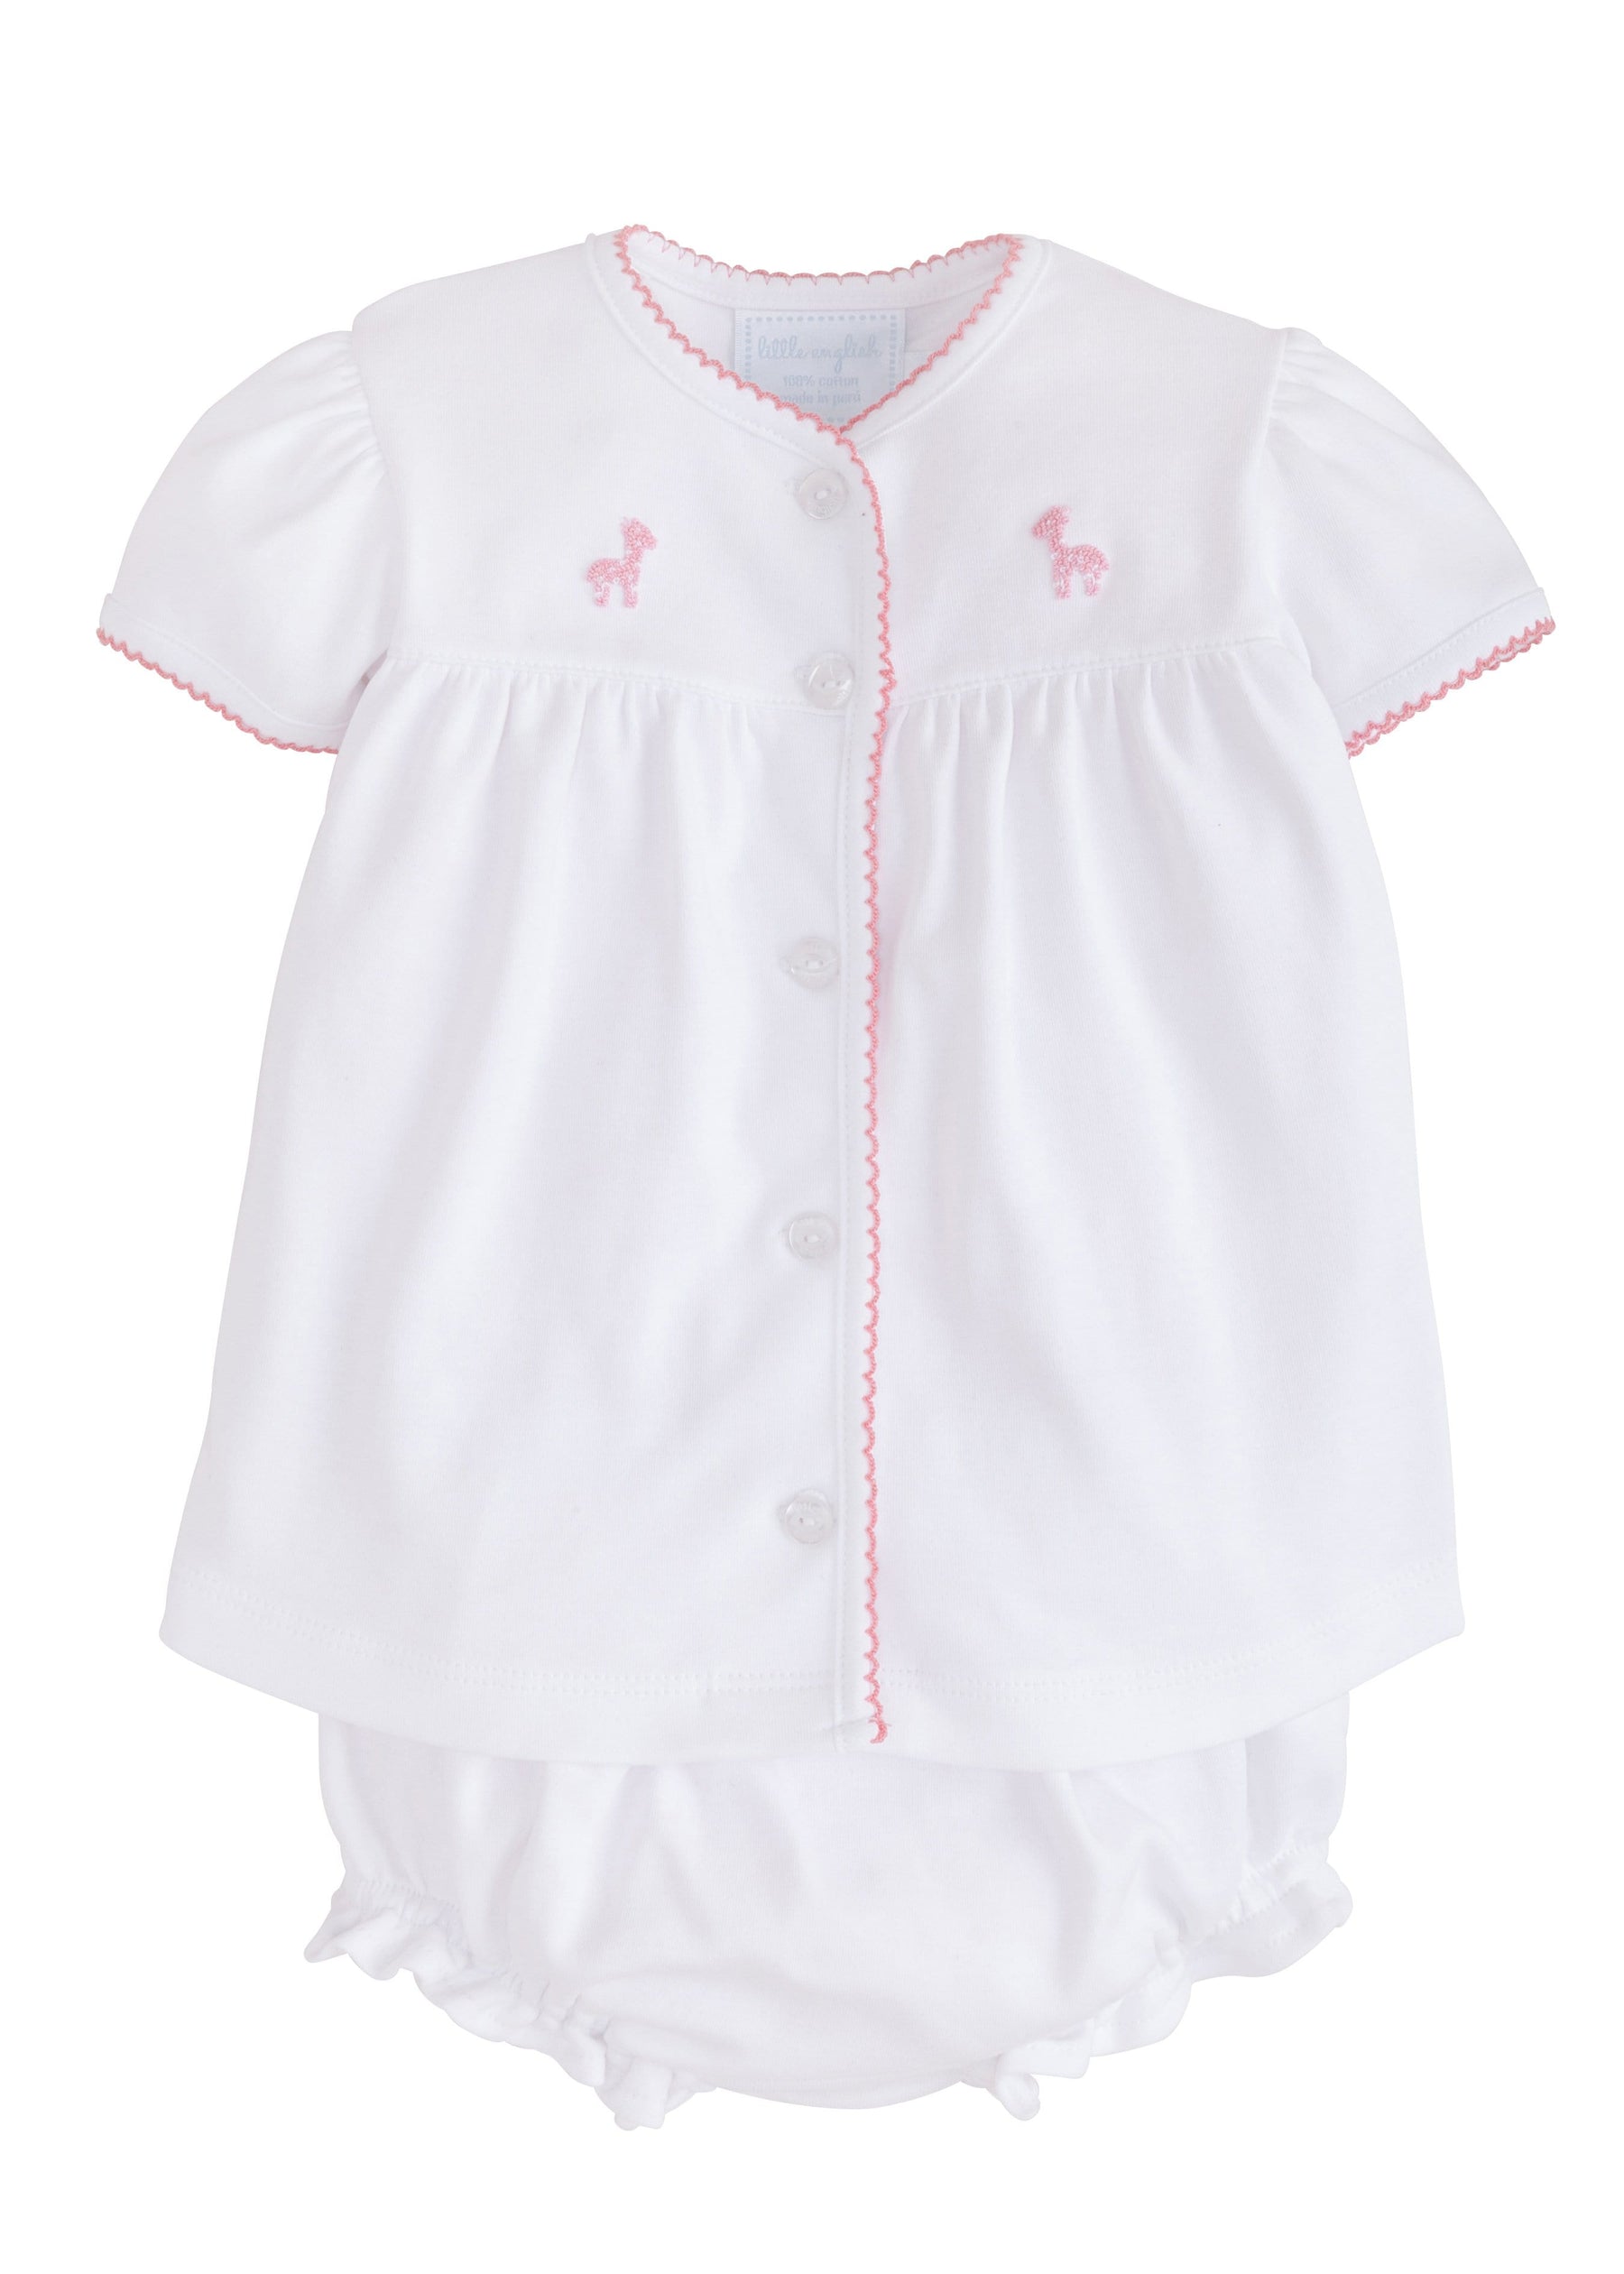 seguridadindustrialcr classic baby girl clothing, layette set with pinpoint pink giraffe, traditional baby gift